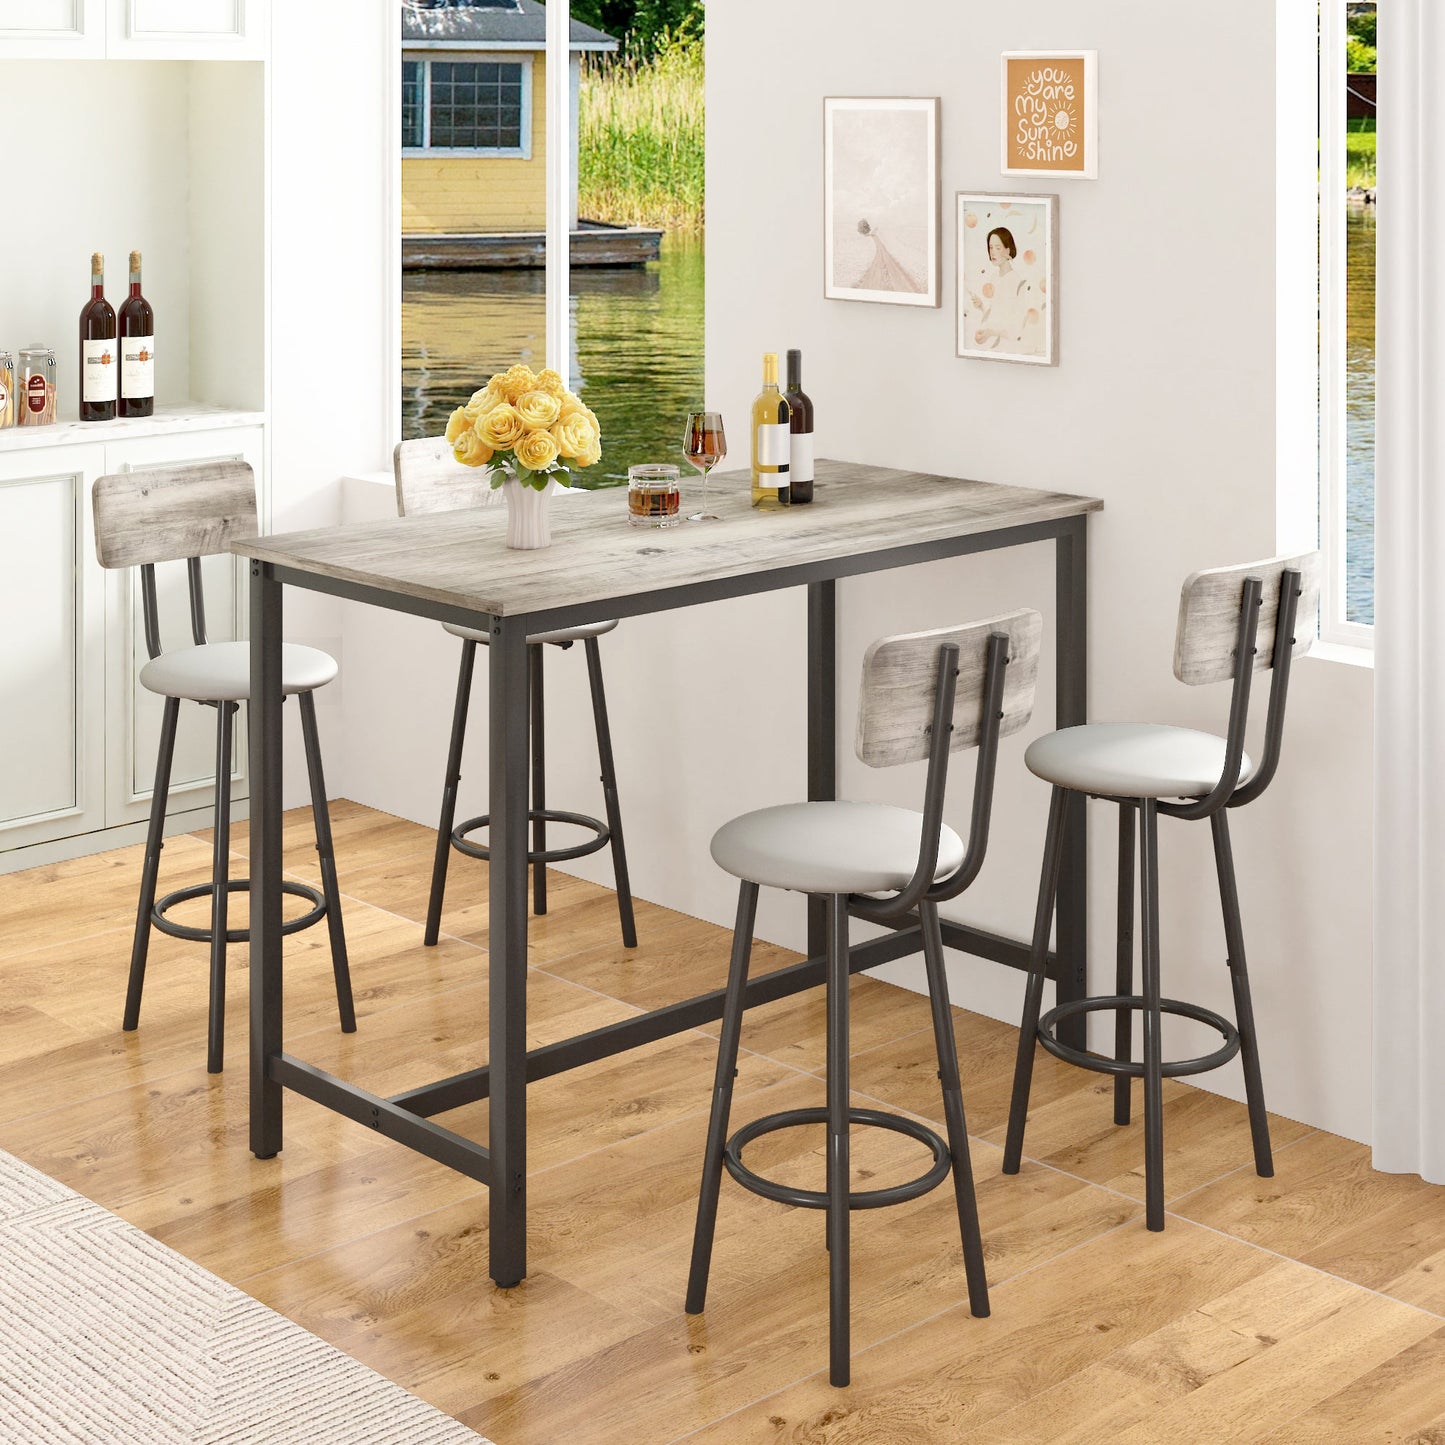 Modern Bar Table Set, Kitchen Table and Chairs for 4, 5 Piece Counter Height Dining Set with 4 Cushioned Stools, Extra Long Bistro Pub Table Set, Breakfast Dining Table Set, Gray